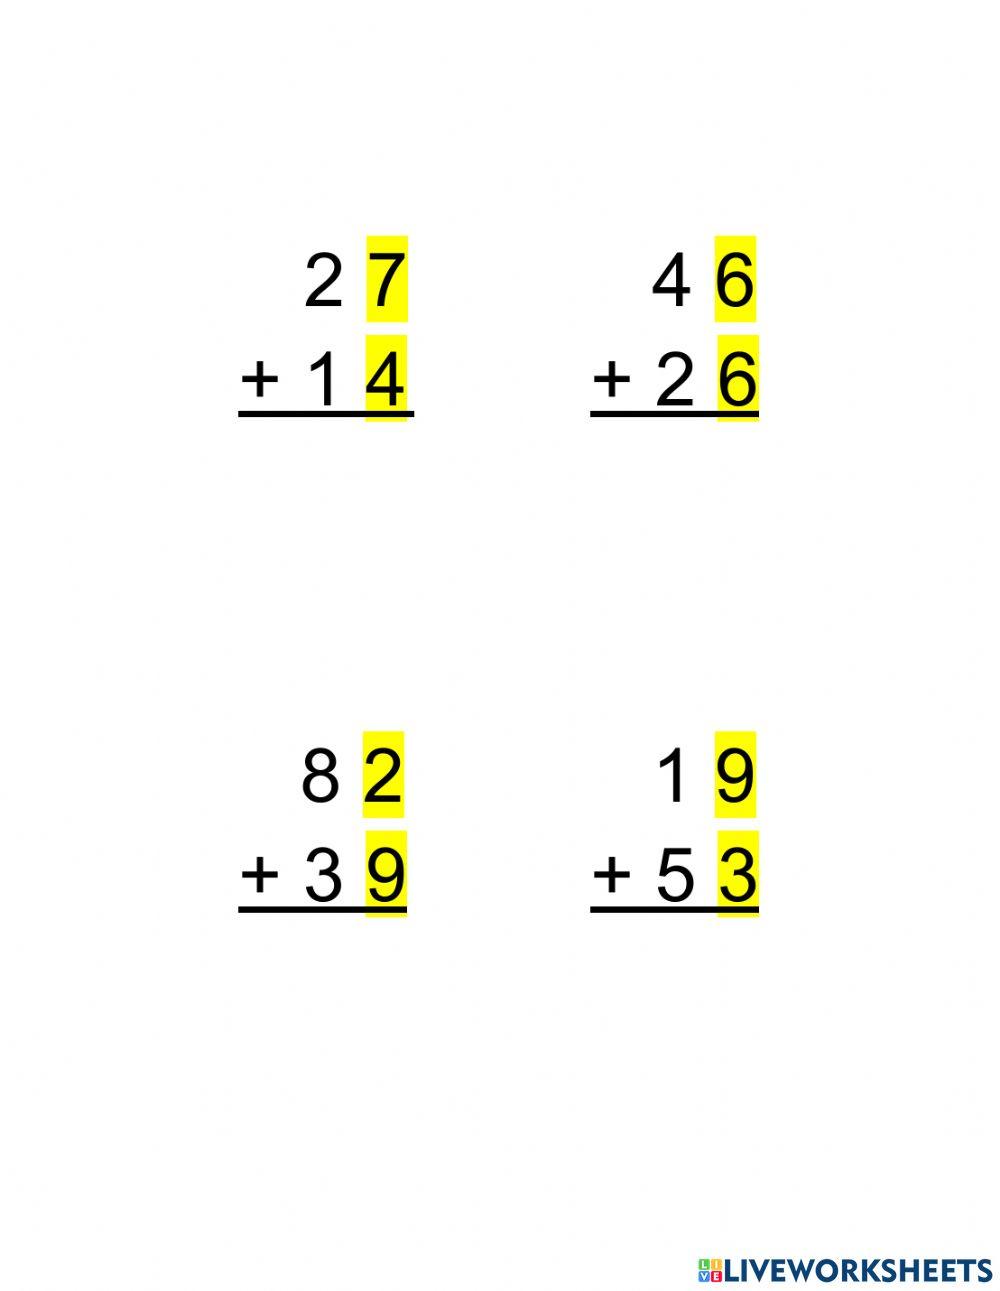 Simple Addition with Regrouping